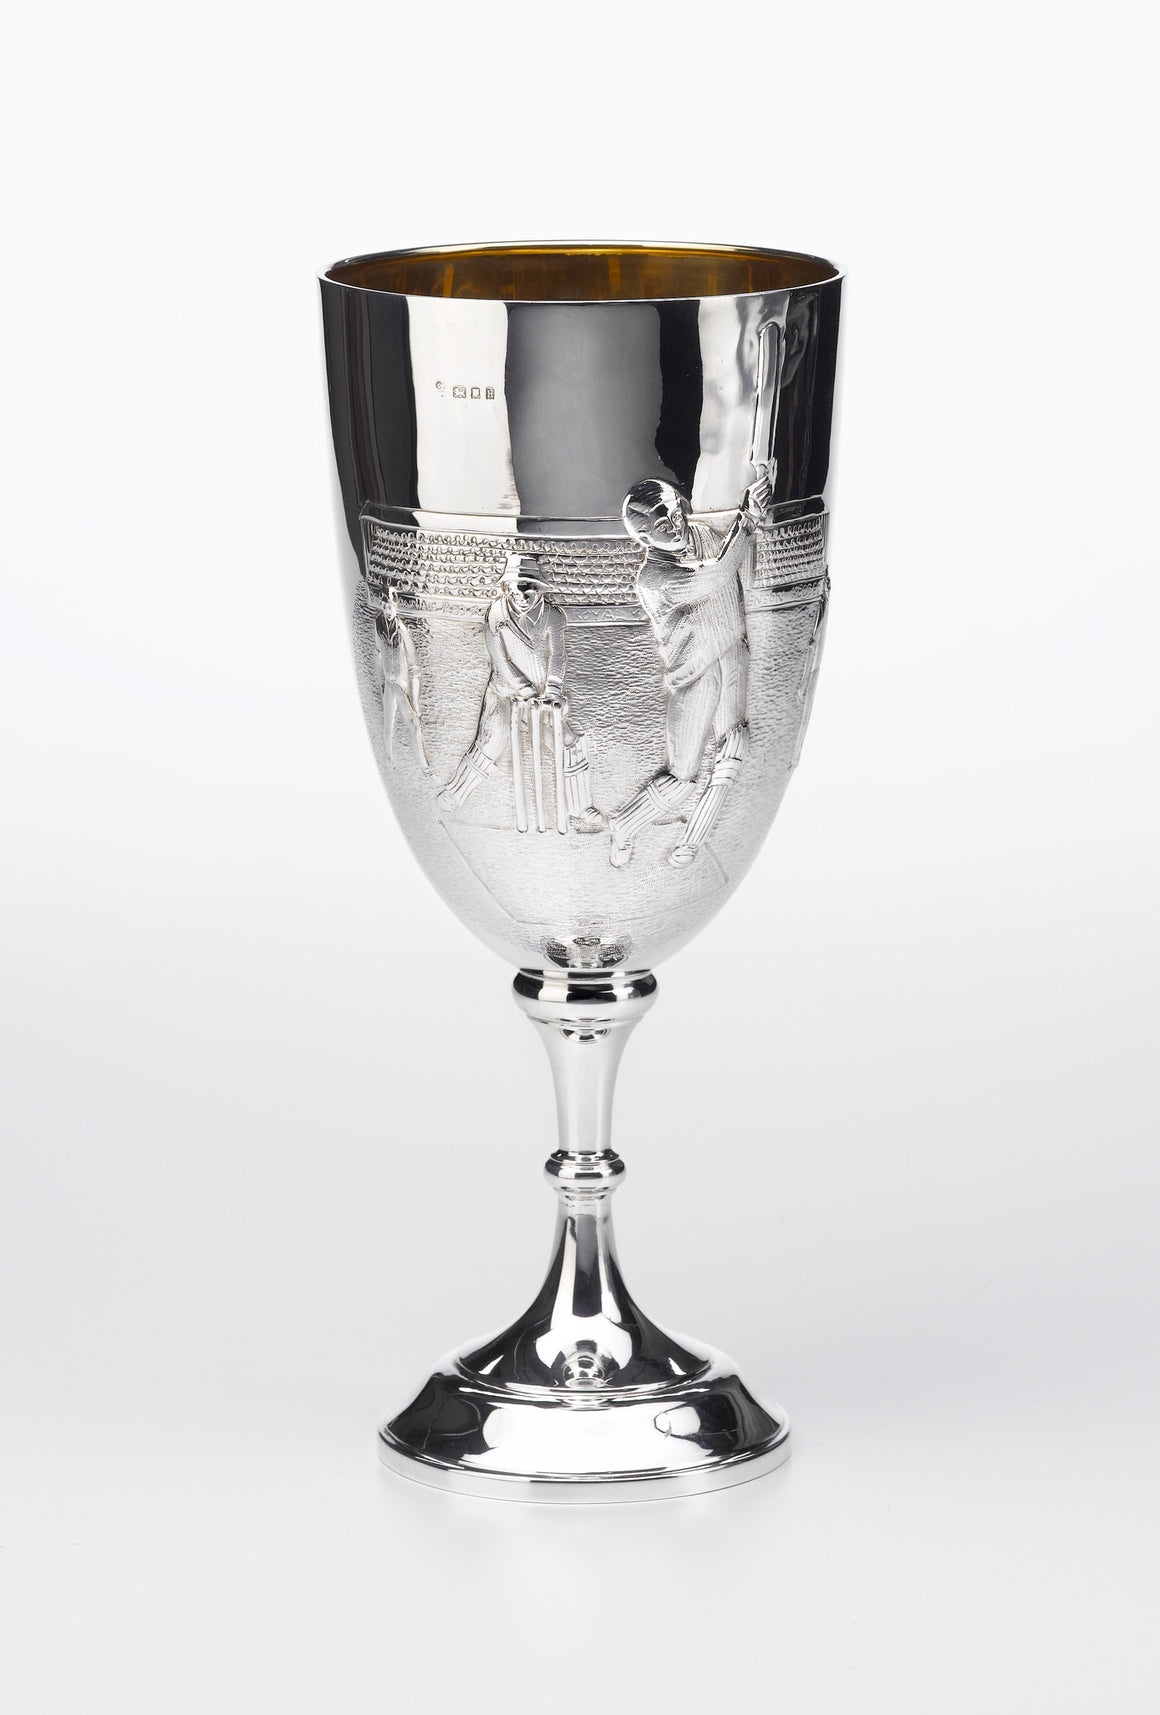 Sterling Silver Cricket Trophy, Circa 1923 - The Great Republic